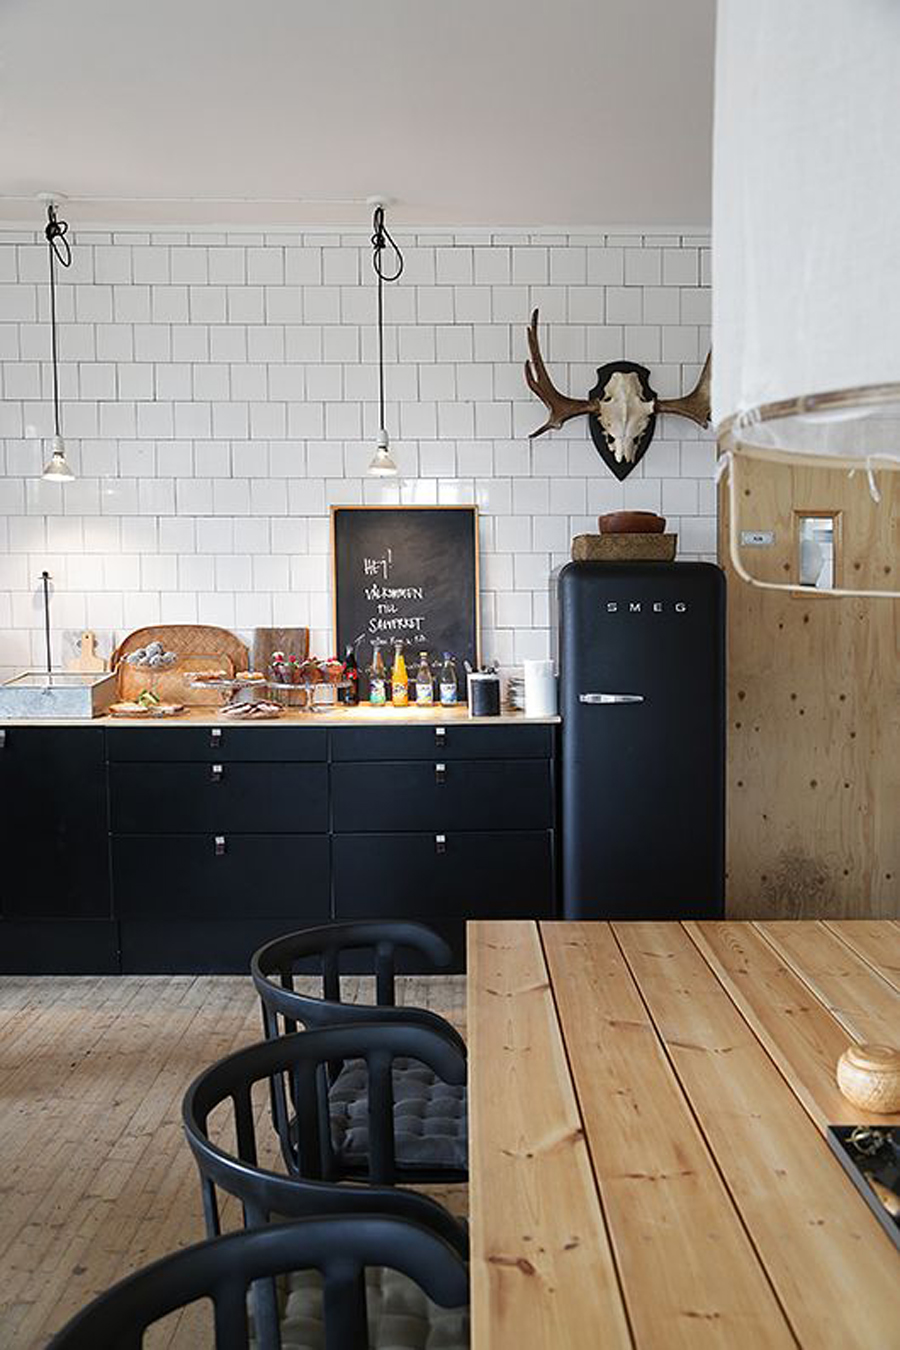 Fascinating Scandinavian kitchen with a dash of black